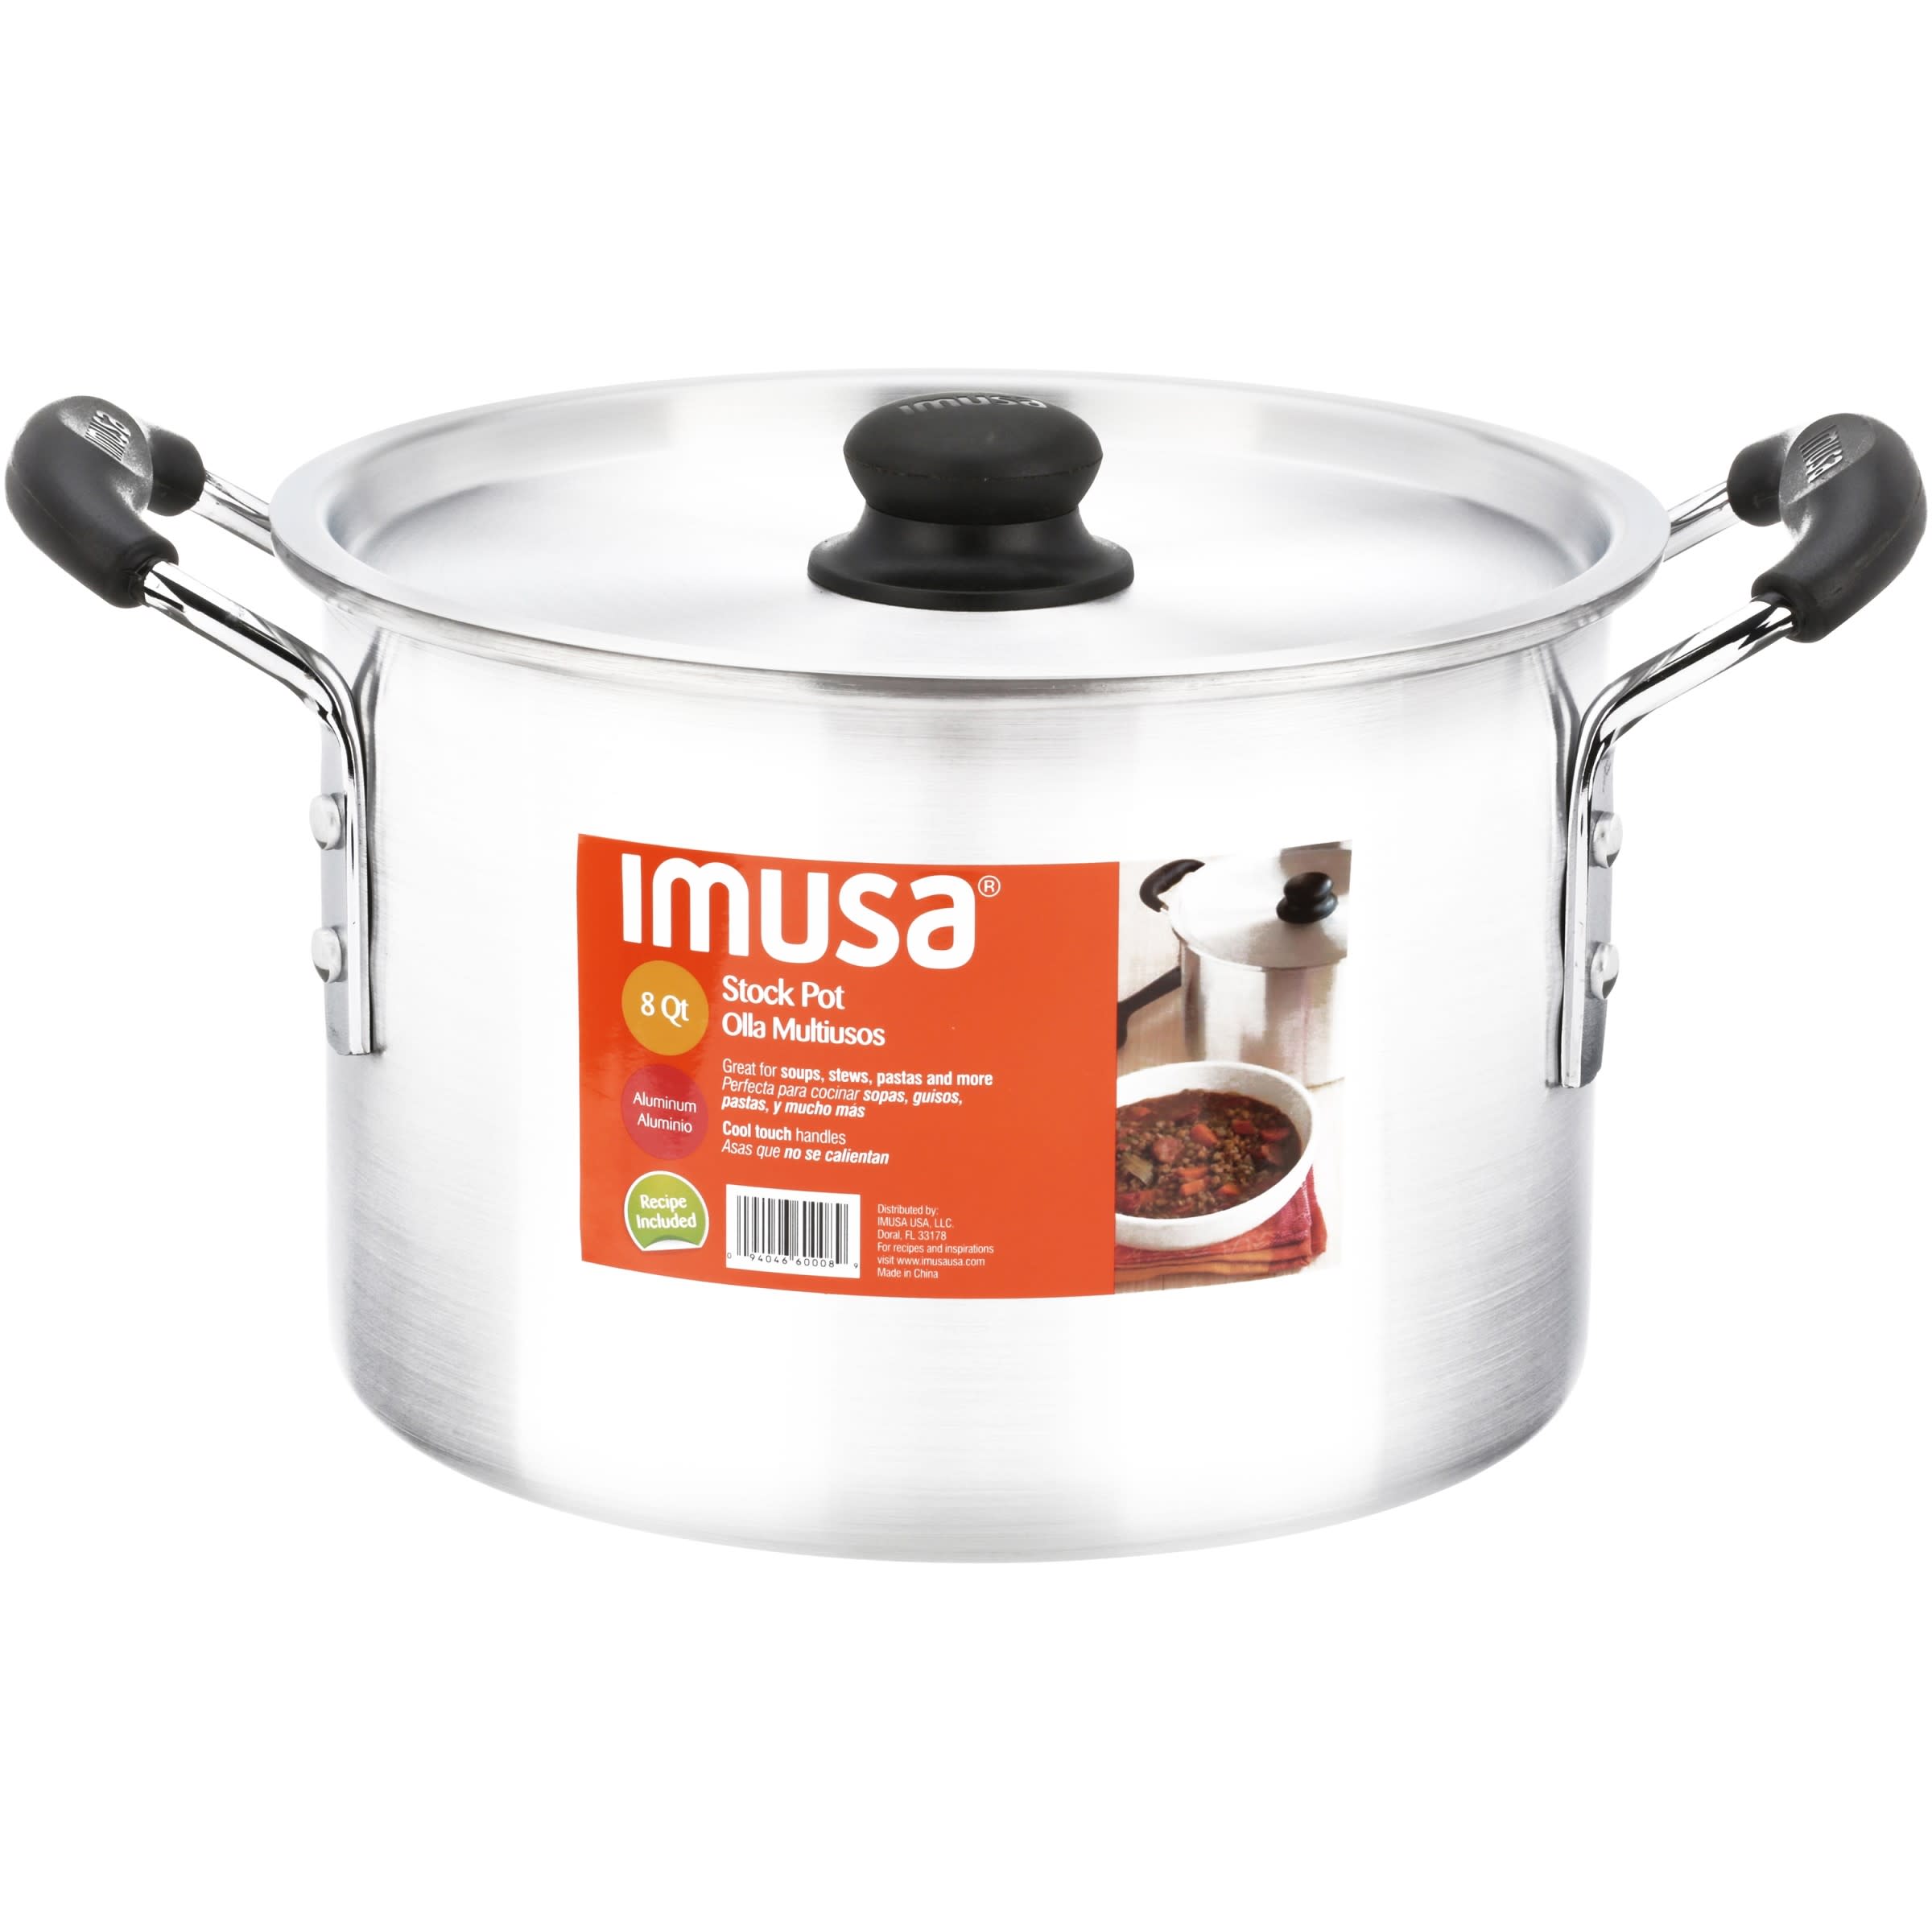 Imusa 8Qt Aluminum Stock Pot with Lid - image 3 of 13